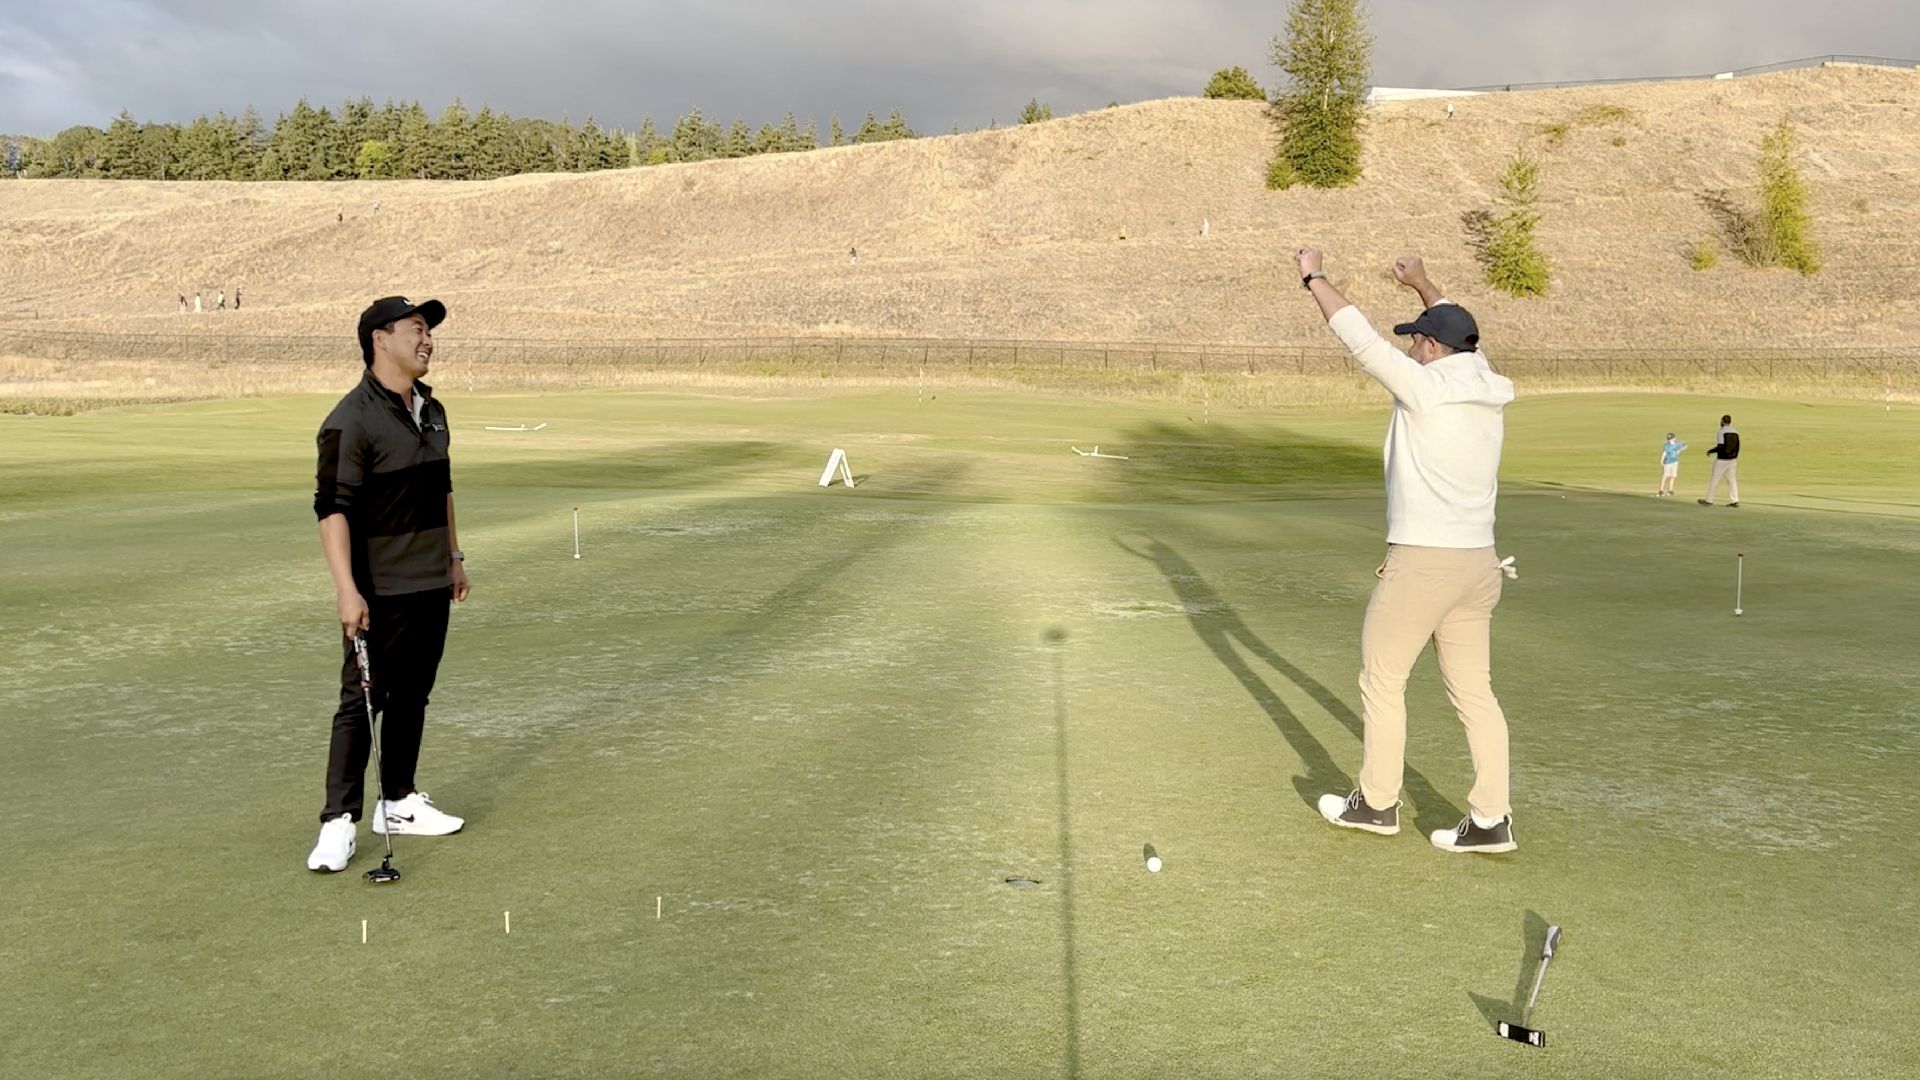 This fun putting competition will help you avoid dreaded 3-putts